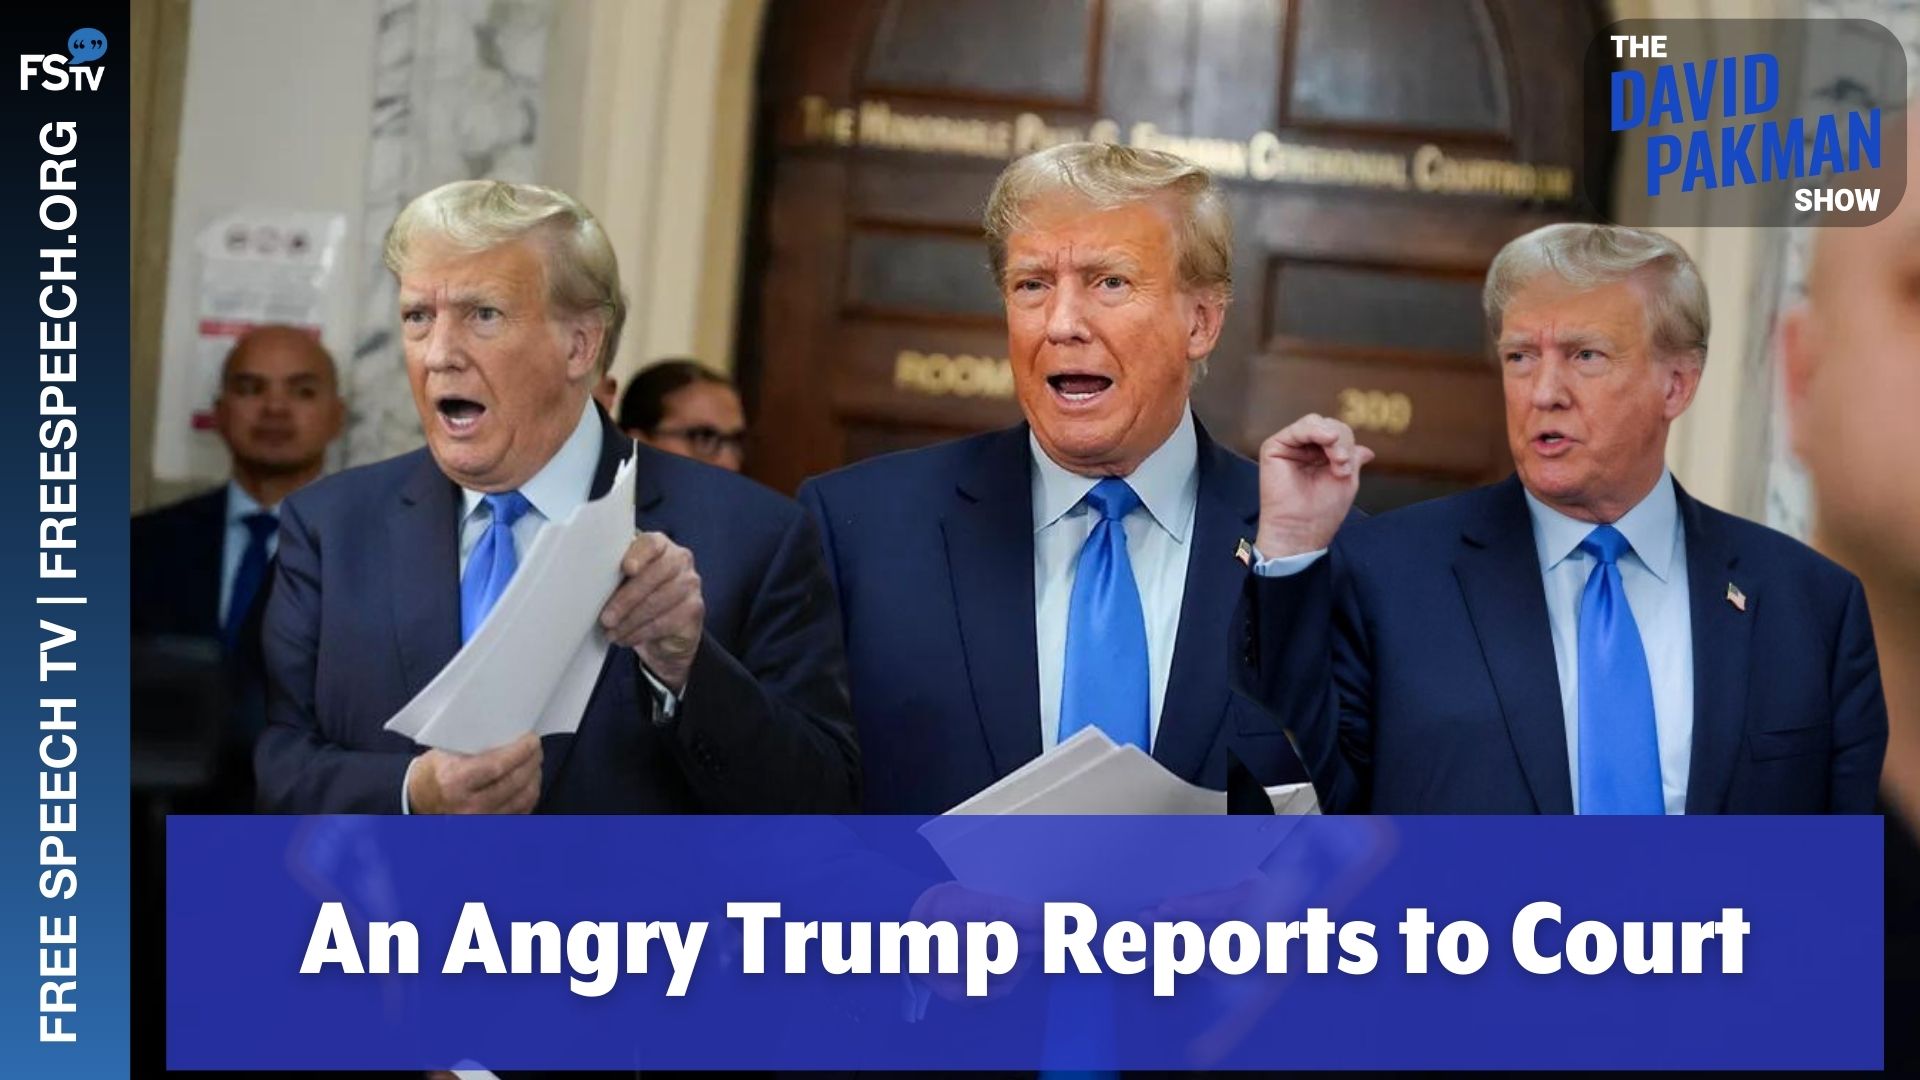 The David Pakman Show | An Angry Trump Reports to Court